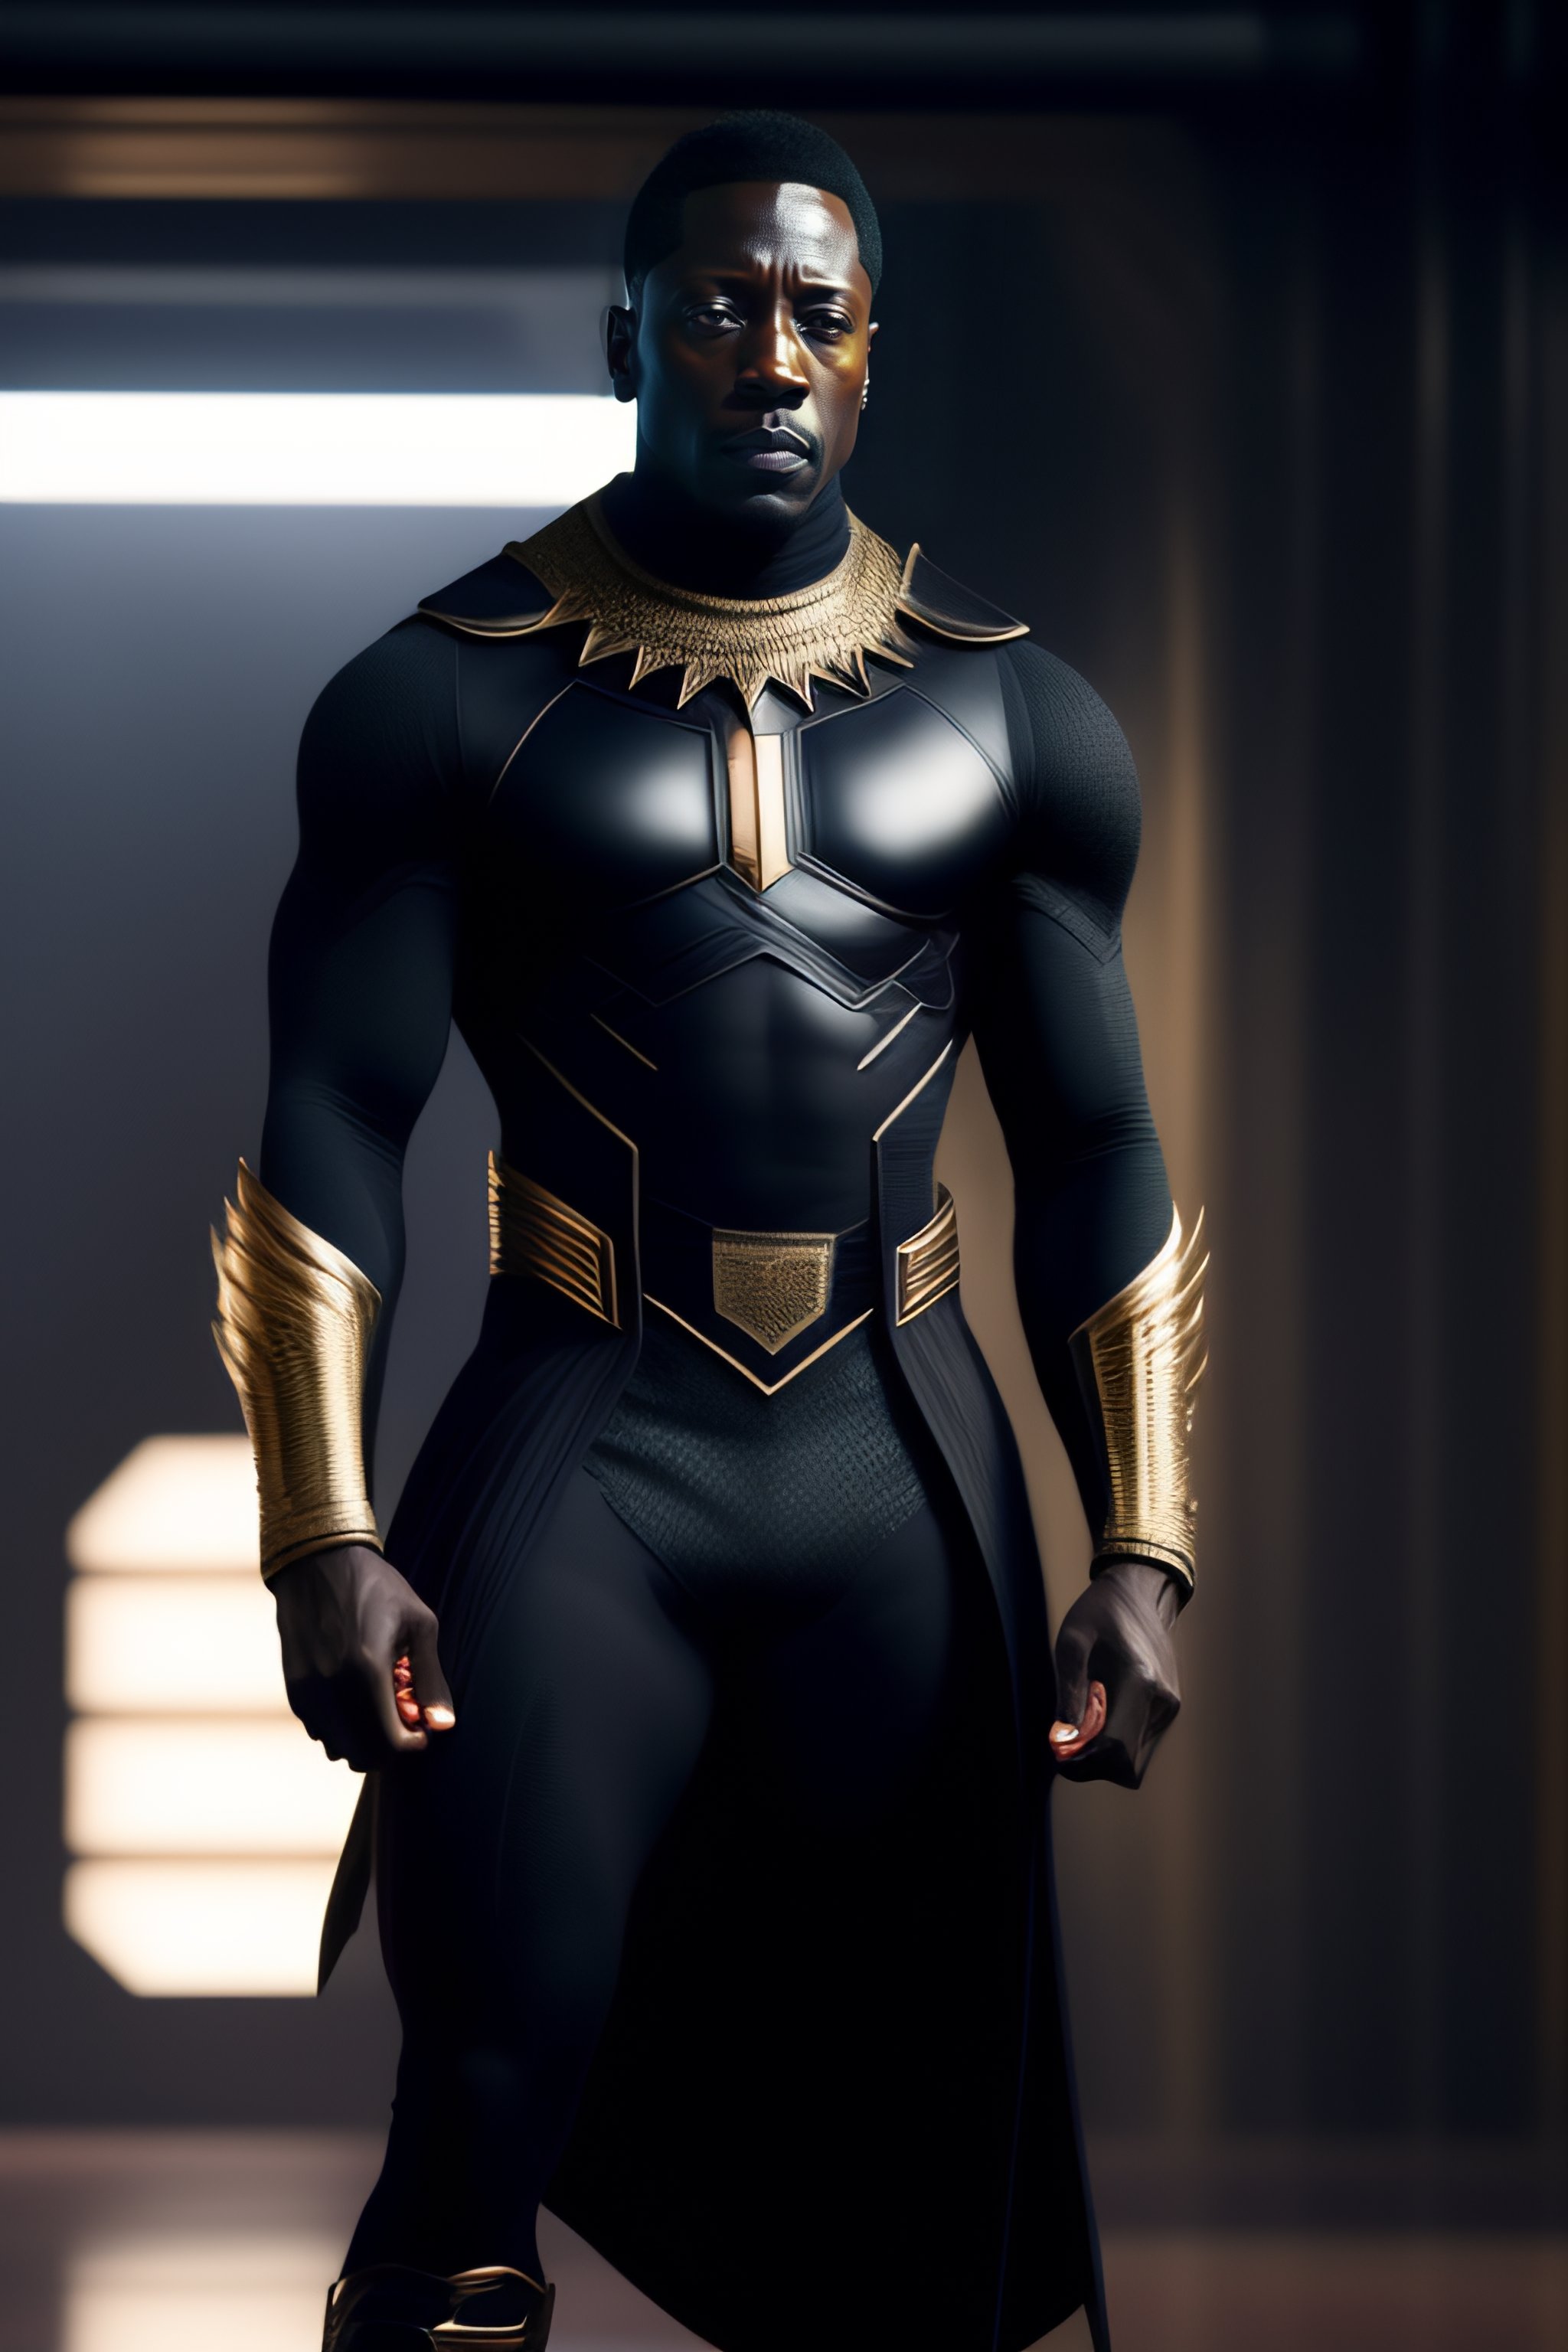 Lexica - Wesley Snipes as t'challa in black panther movie, full body